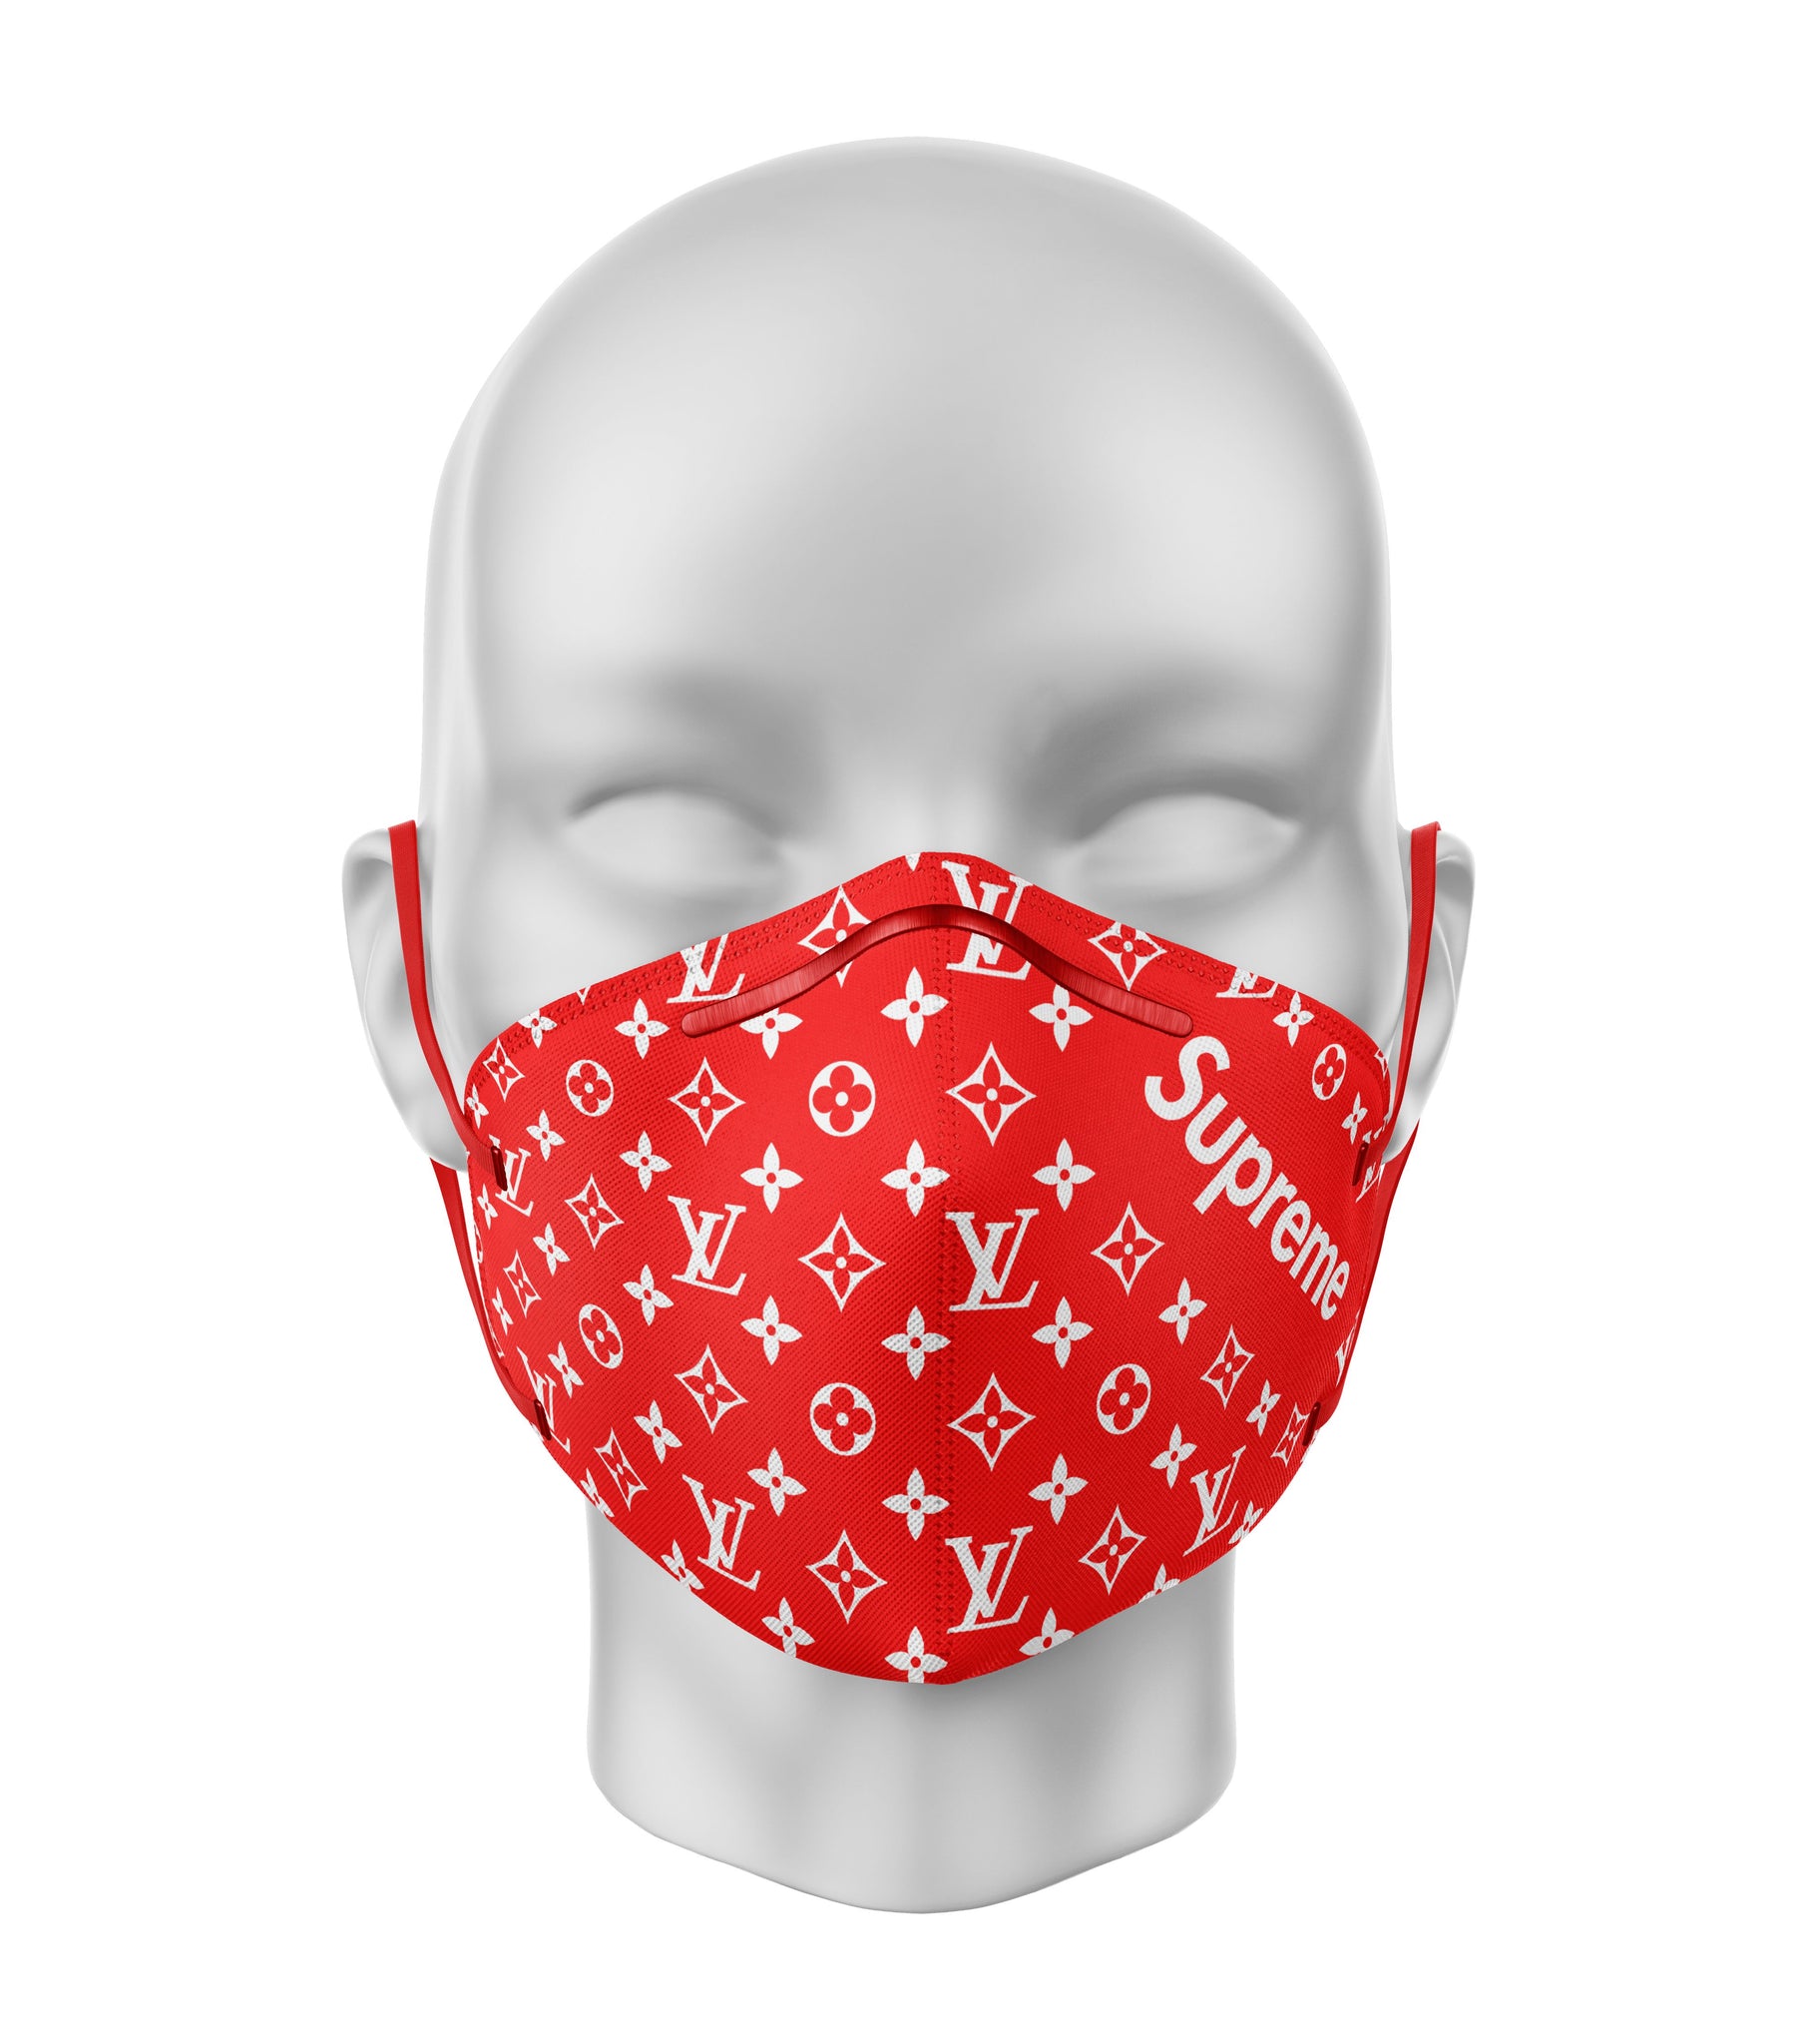 details for store reputable site lv face mask - nrd.kbic-nsn.gov